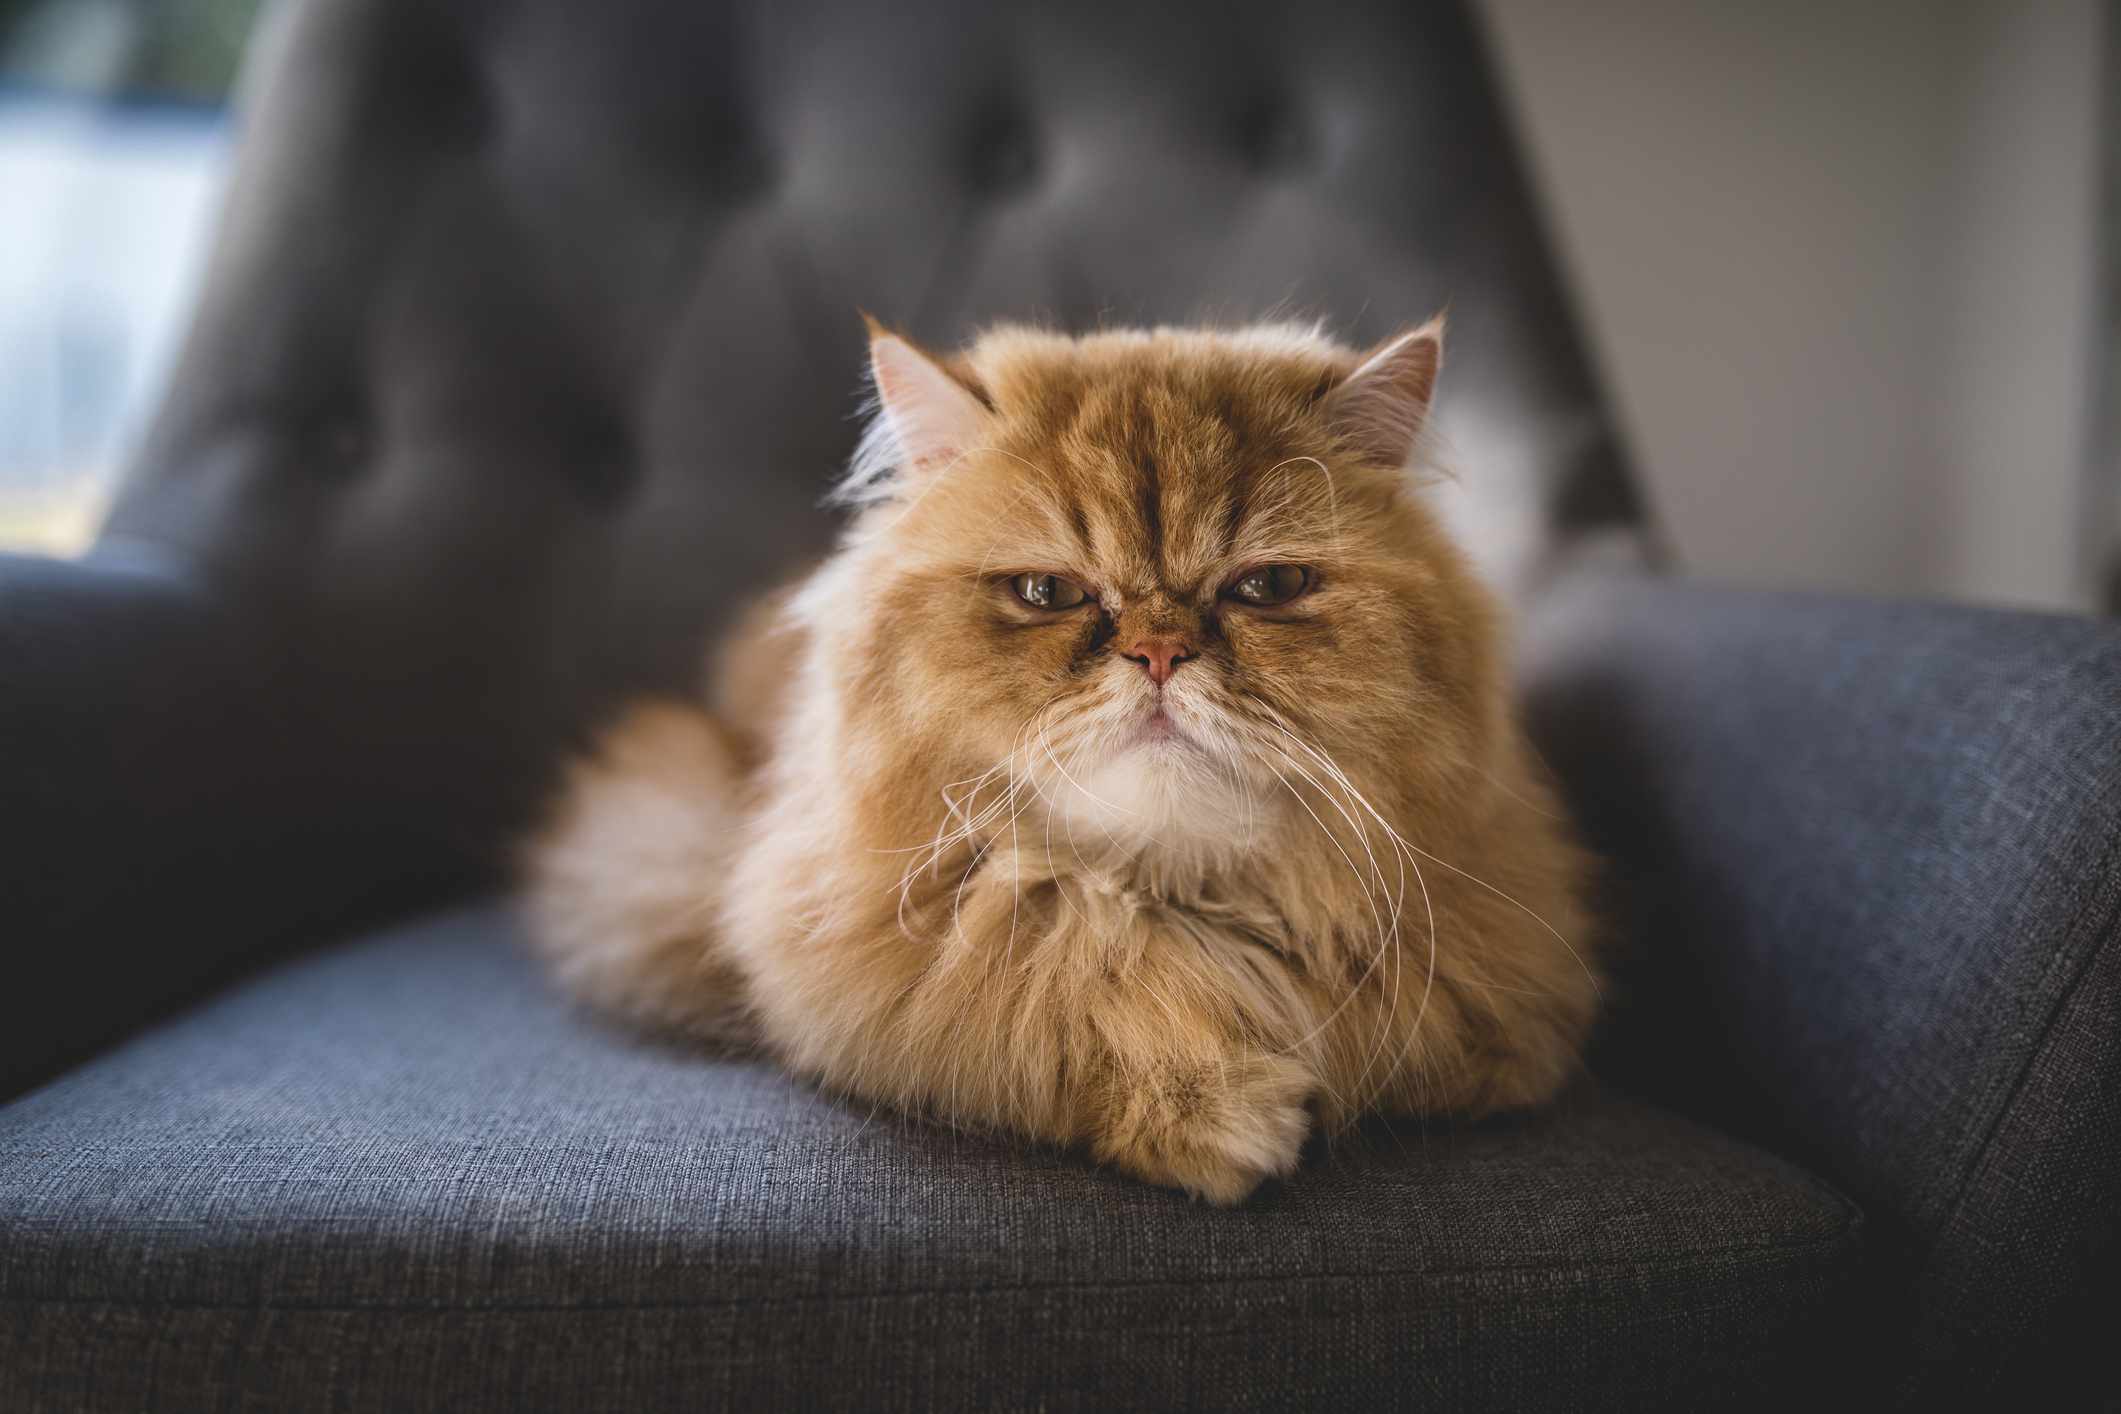 A flat-faced orange Persian cat staring at the camera laying on a plush chair.